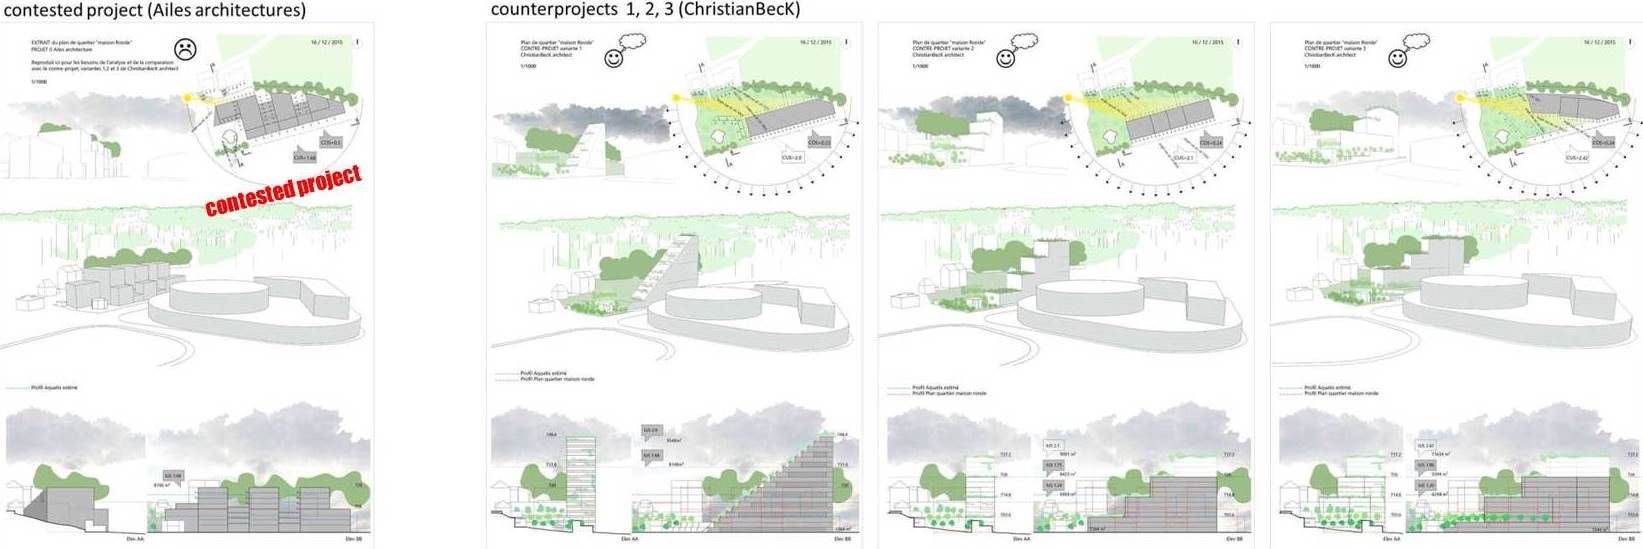 **comparison**
 
* 3  counter-projects variations are provided to demonstrate that the COS can be reduced by 2 and the CUS raised by around 20% if a project is designed according the geomorphology, the sun orientation, the view and the built environment.

* the 3 variations of the counter-project are implanted in the slope between the road and the plateau, free of the plots pattern in order to keep the conch available for a green area.
next pages show each variations separately with green zone, view angle, and benefit from the sun orientation.